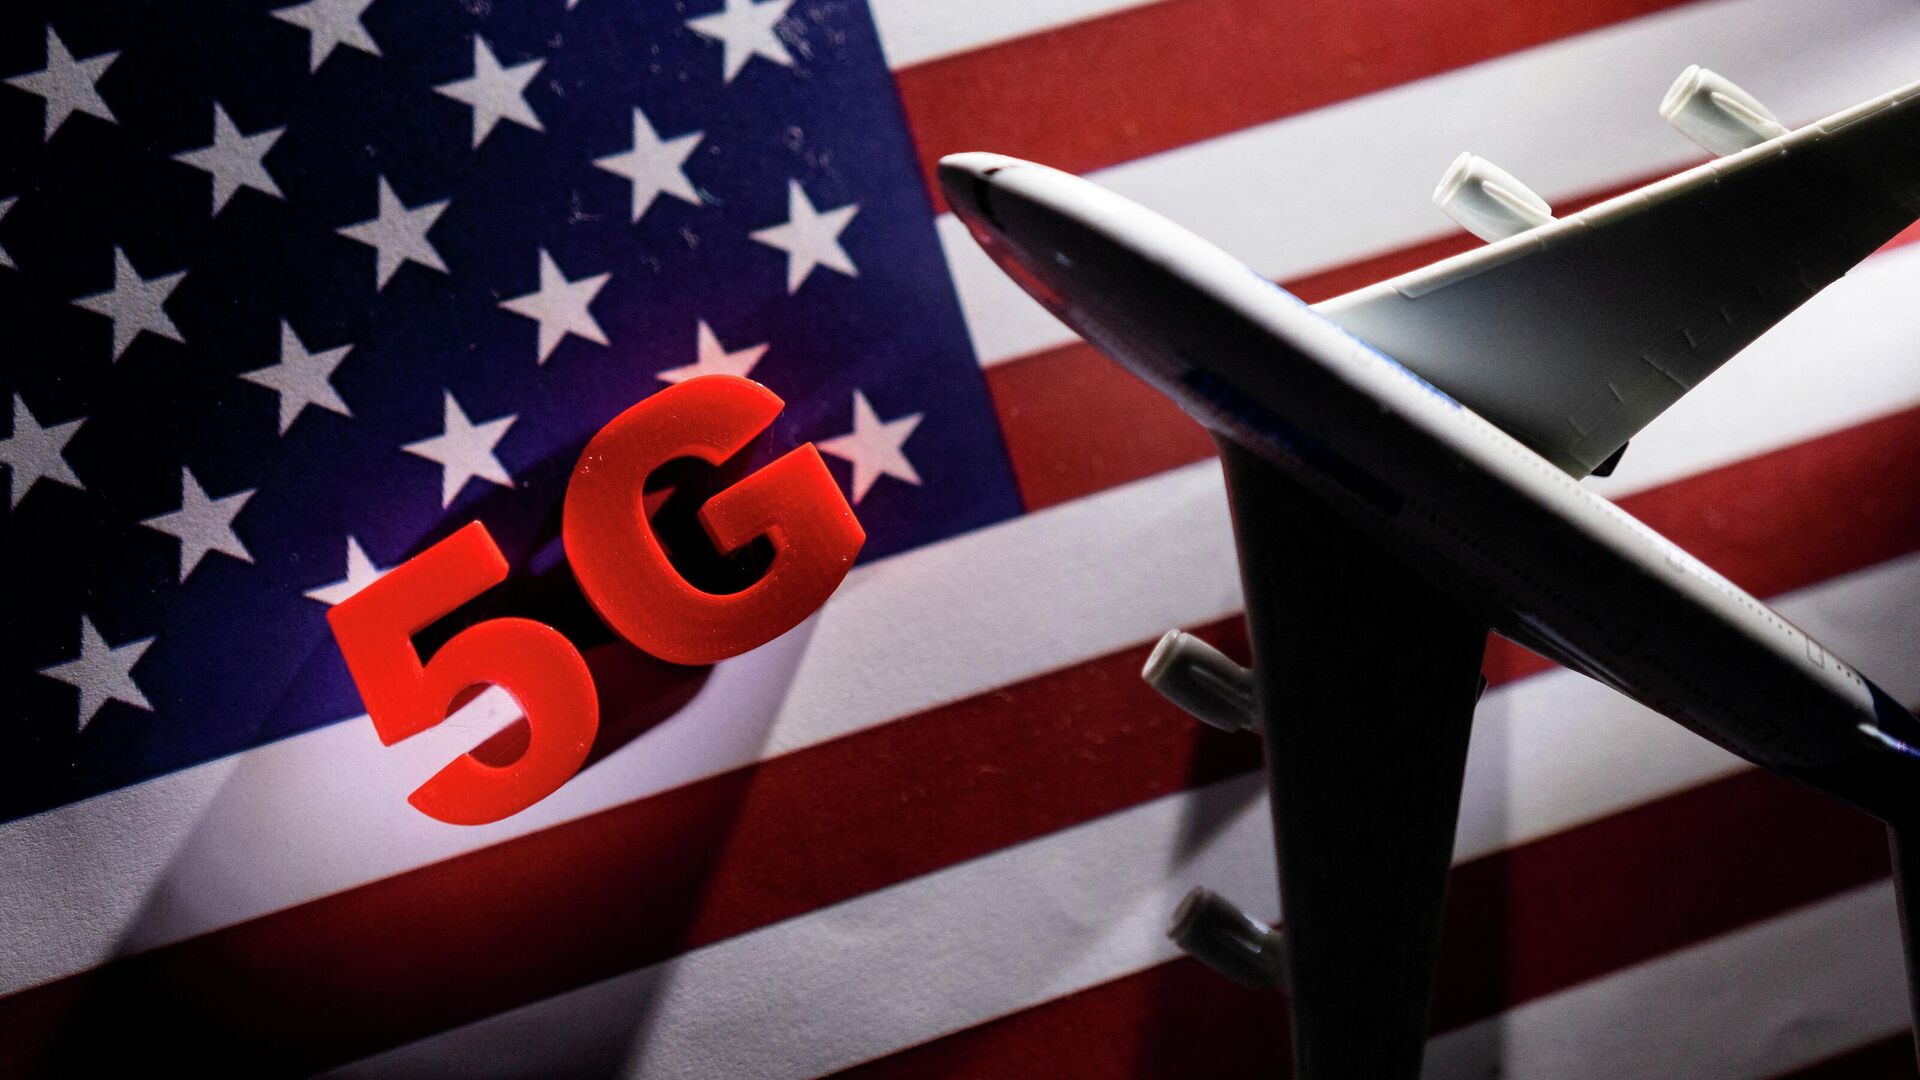 5G words and an airplane toy are placed on a printed U.S. flag in this illustration taken January 18, 2022. - Sputnik International, 1920, 28.01.2022